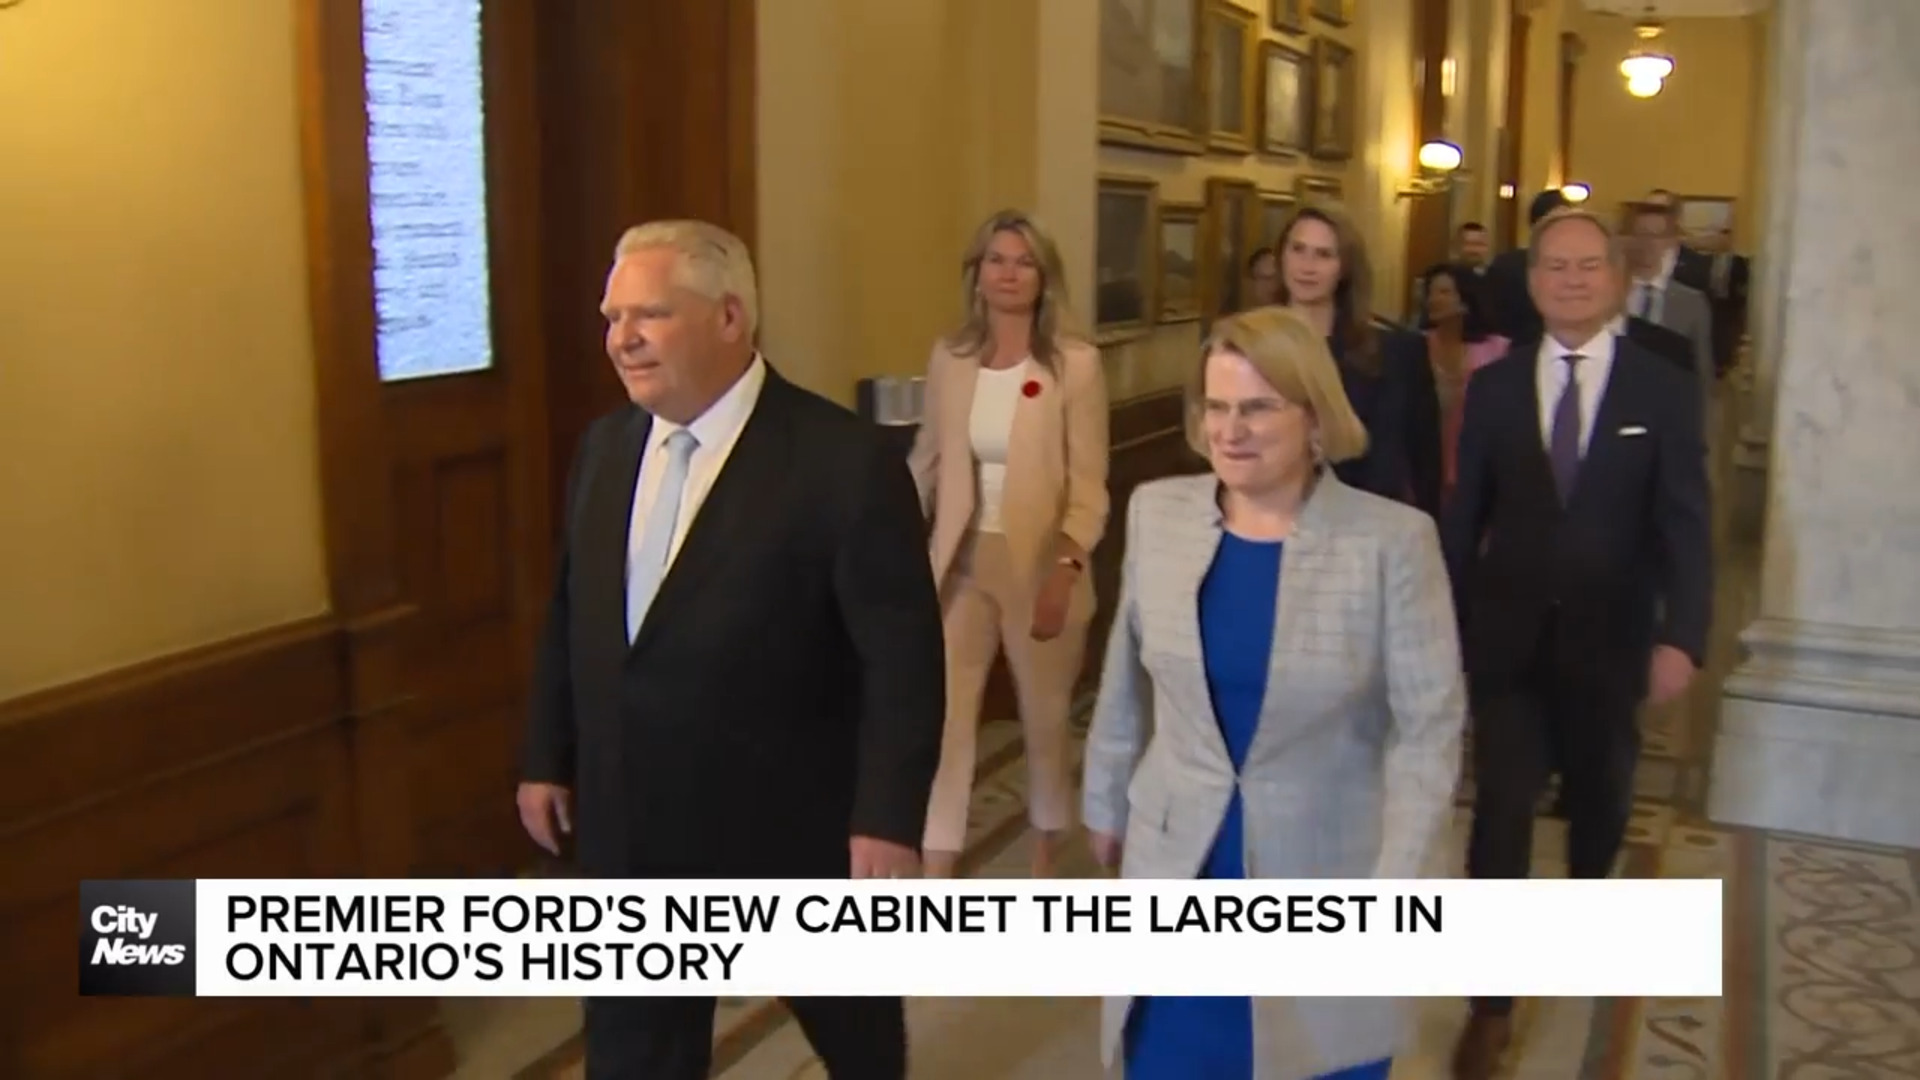 Premier Ford unveils the largest cabinet in Ontario's history